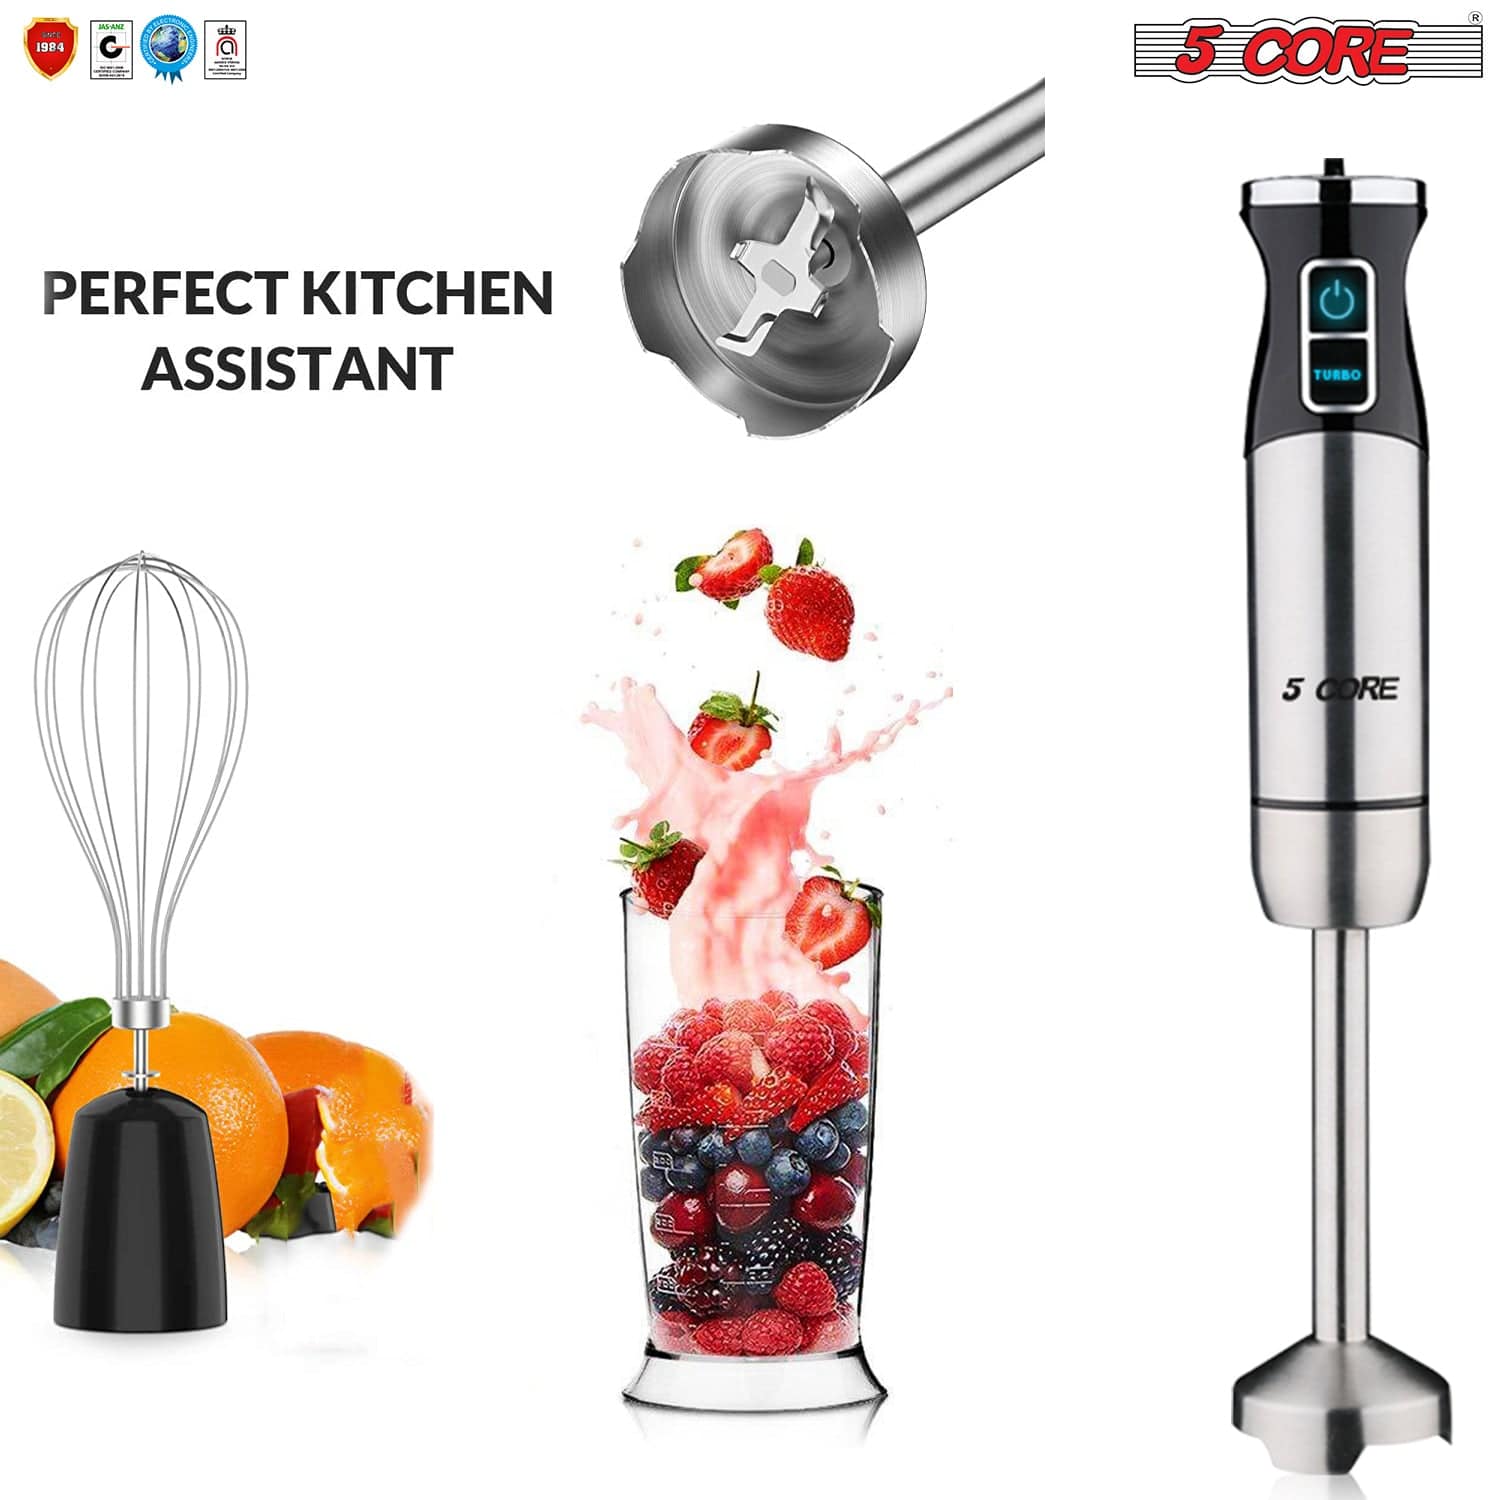 US Plug 4-in-1 Immersion Hand Blender, Powerful 500W Handheld Stick Blender  With 304 Stainless Steel Blades, Chopper, Beaker, Whisk For Smoothie, Sauc